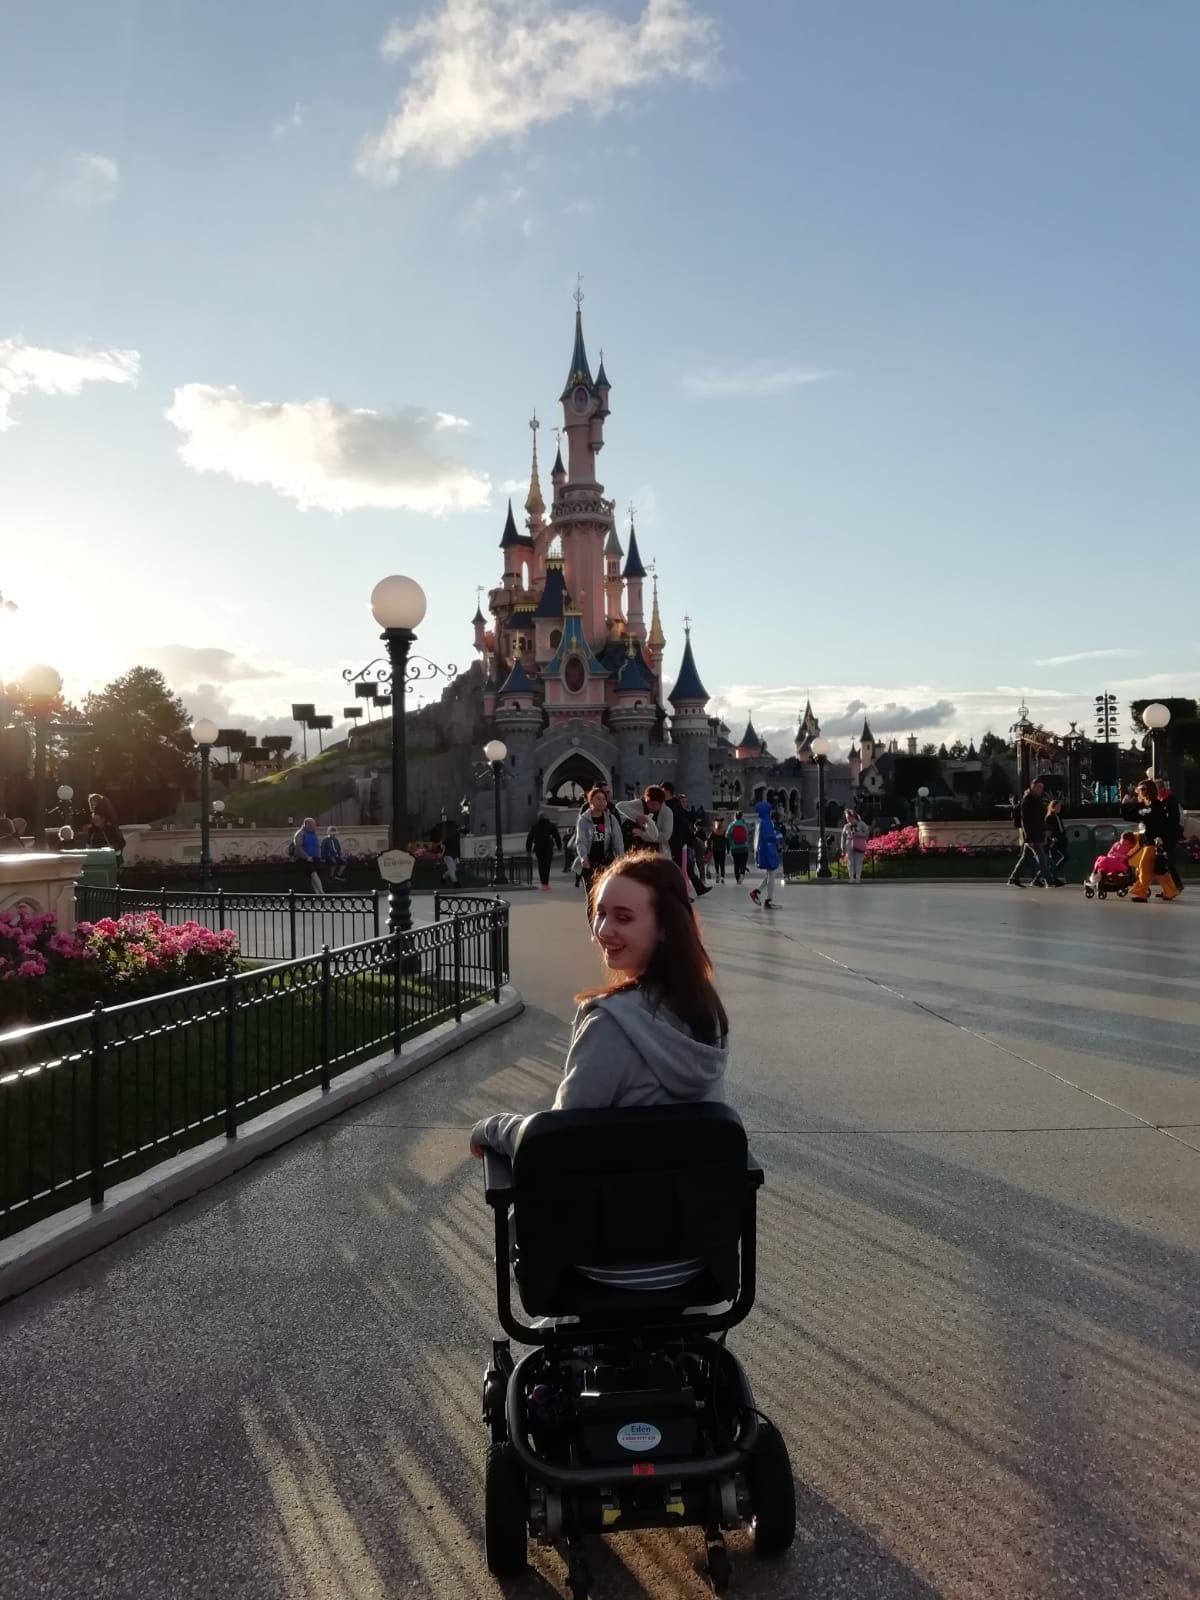 pippa in powerchair, facing disneyland castle but turning back to smile at castle